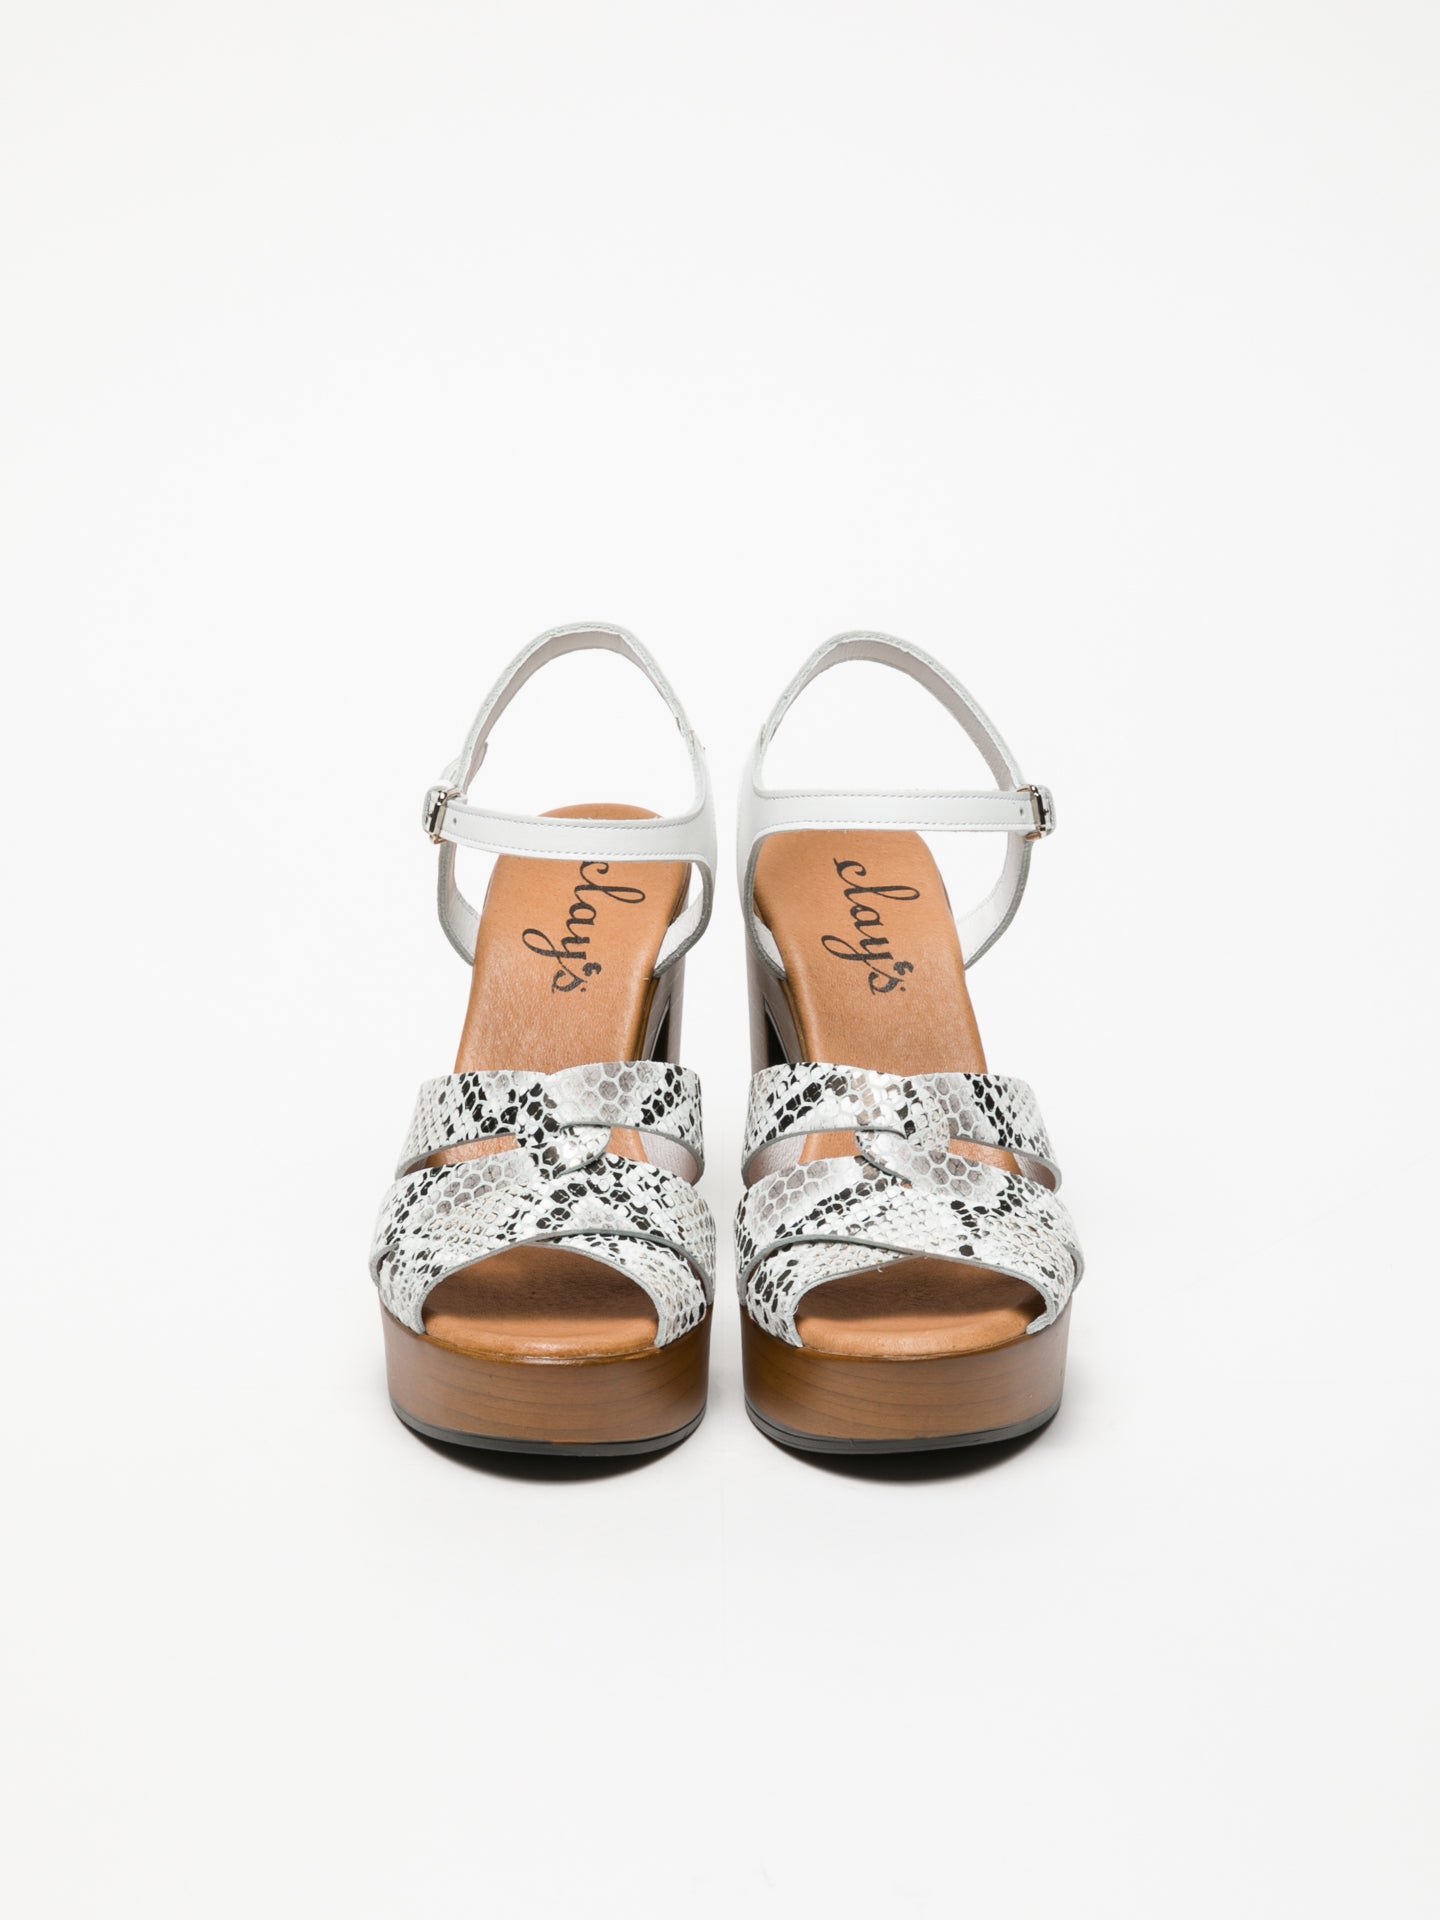 Clay's White Buckle Sandals